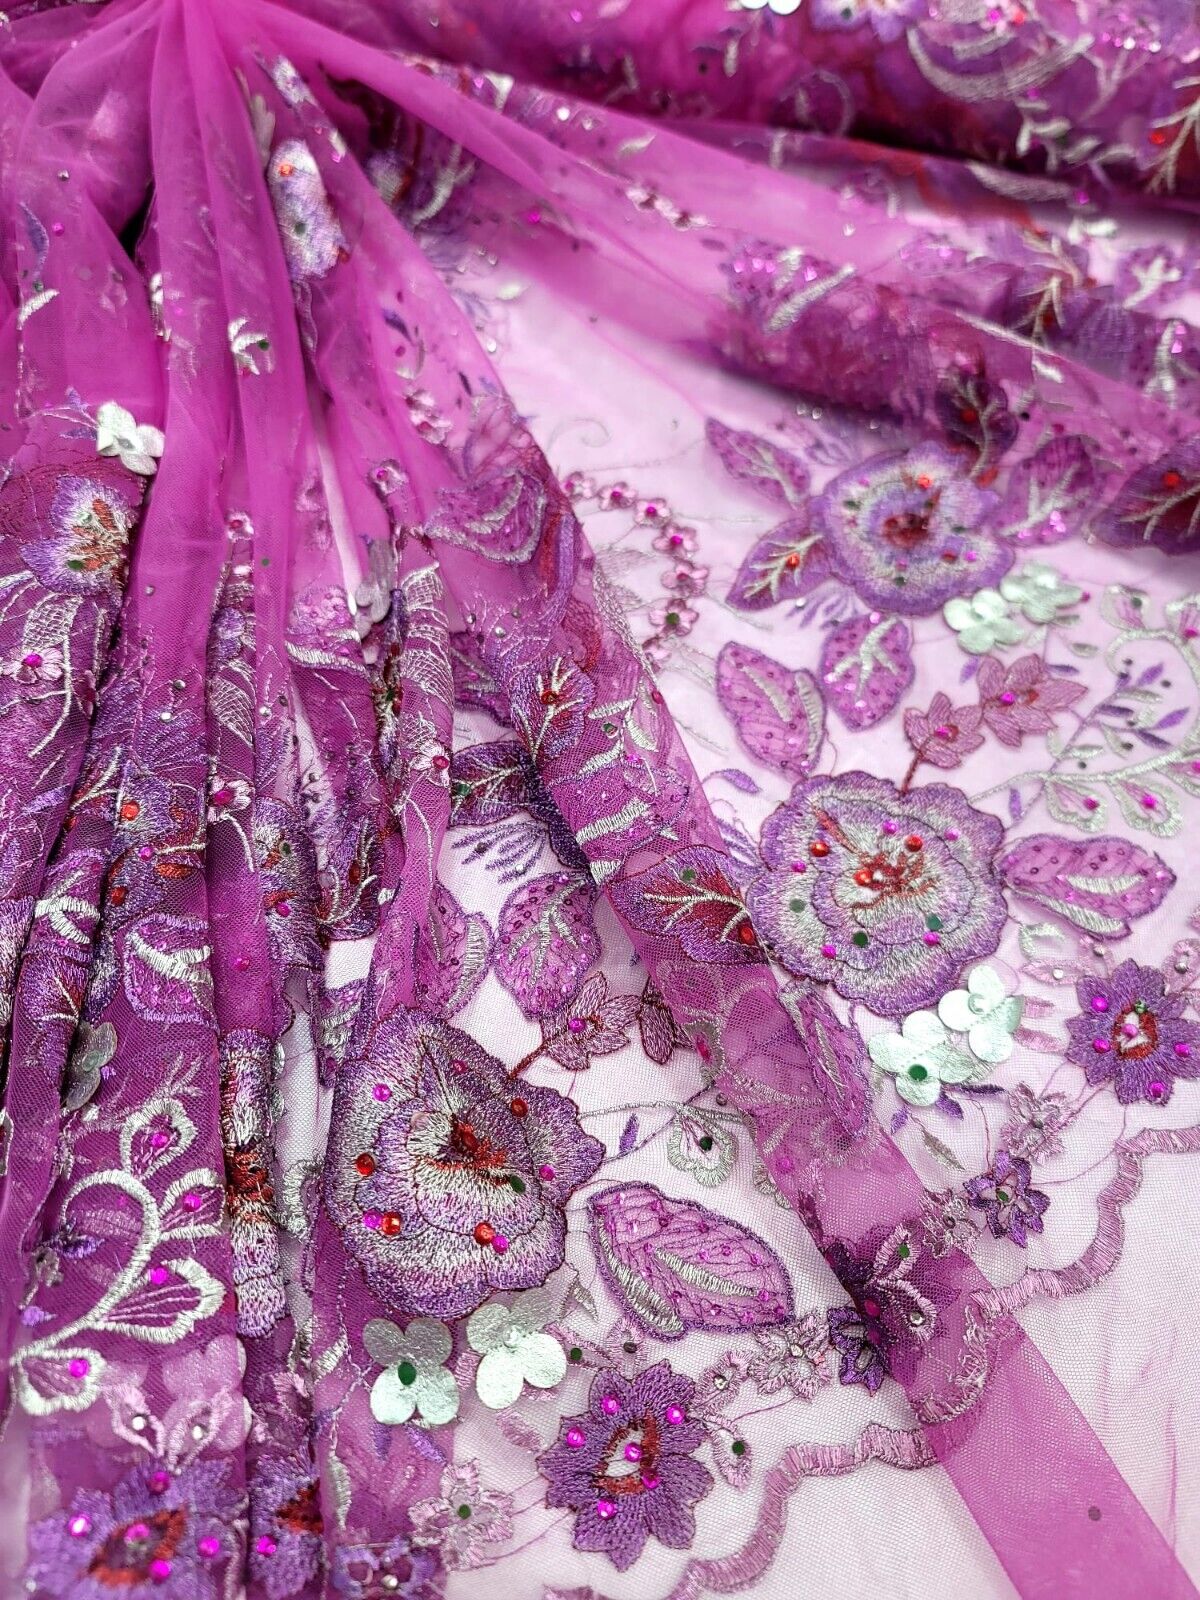 Purple Lace Fabric by the Yard - Floral 3D Silver Flower Embroidered with Glued Rhinestones